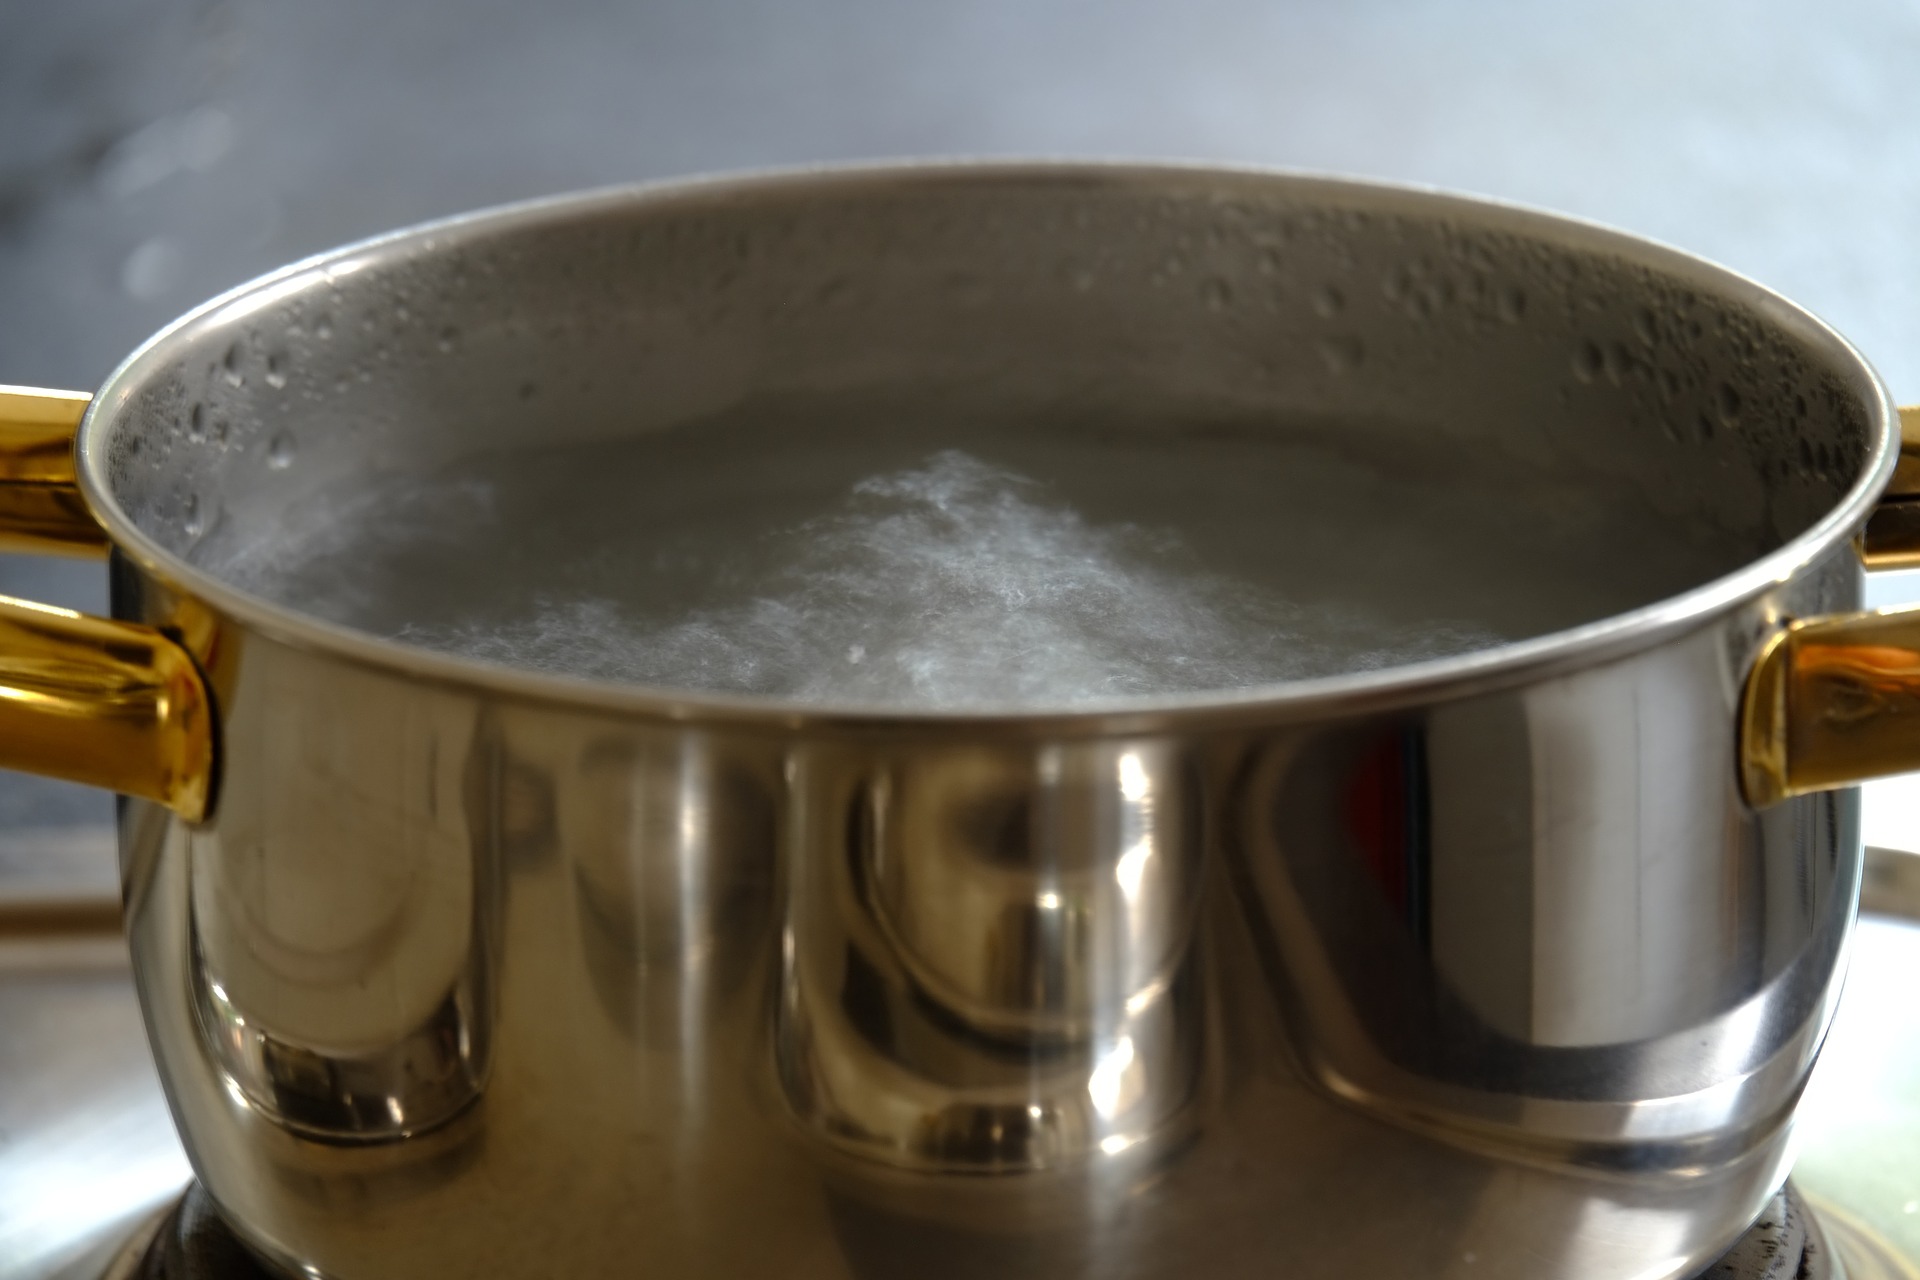 12 Unexpected Tips You Need When Boiling Water